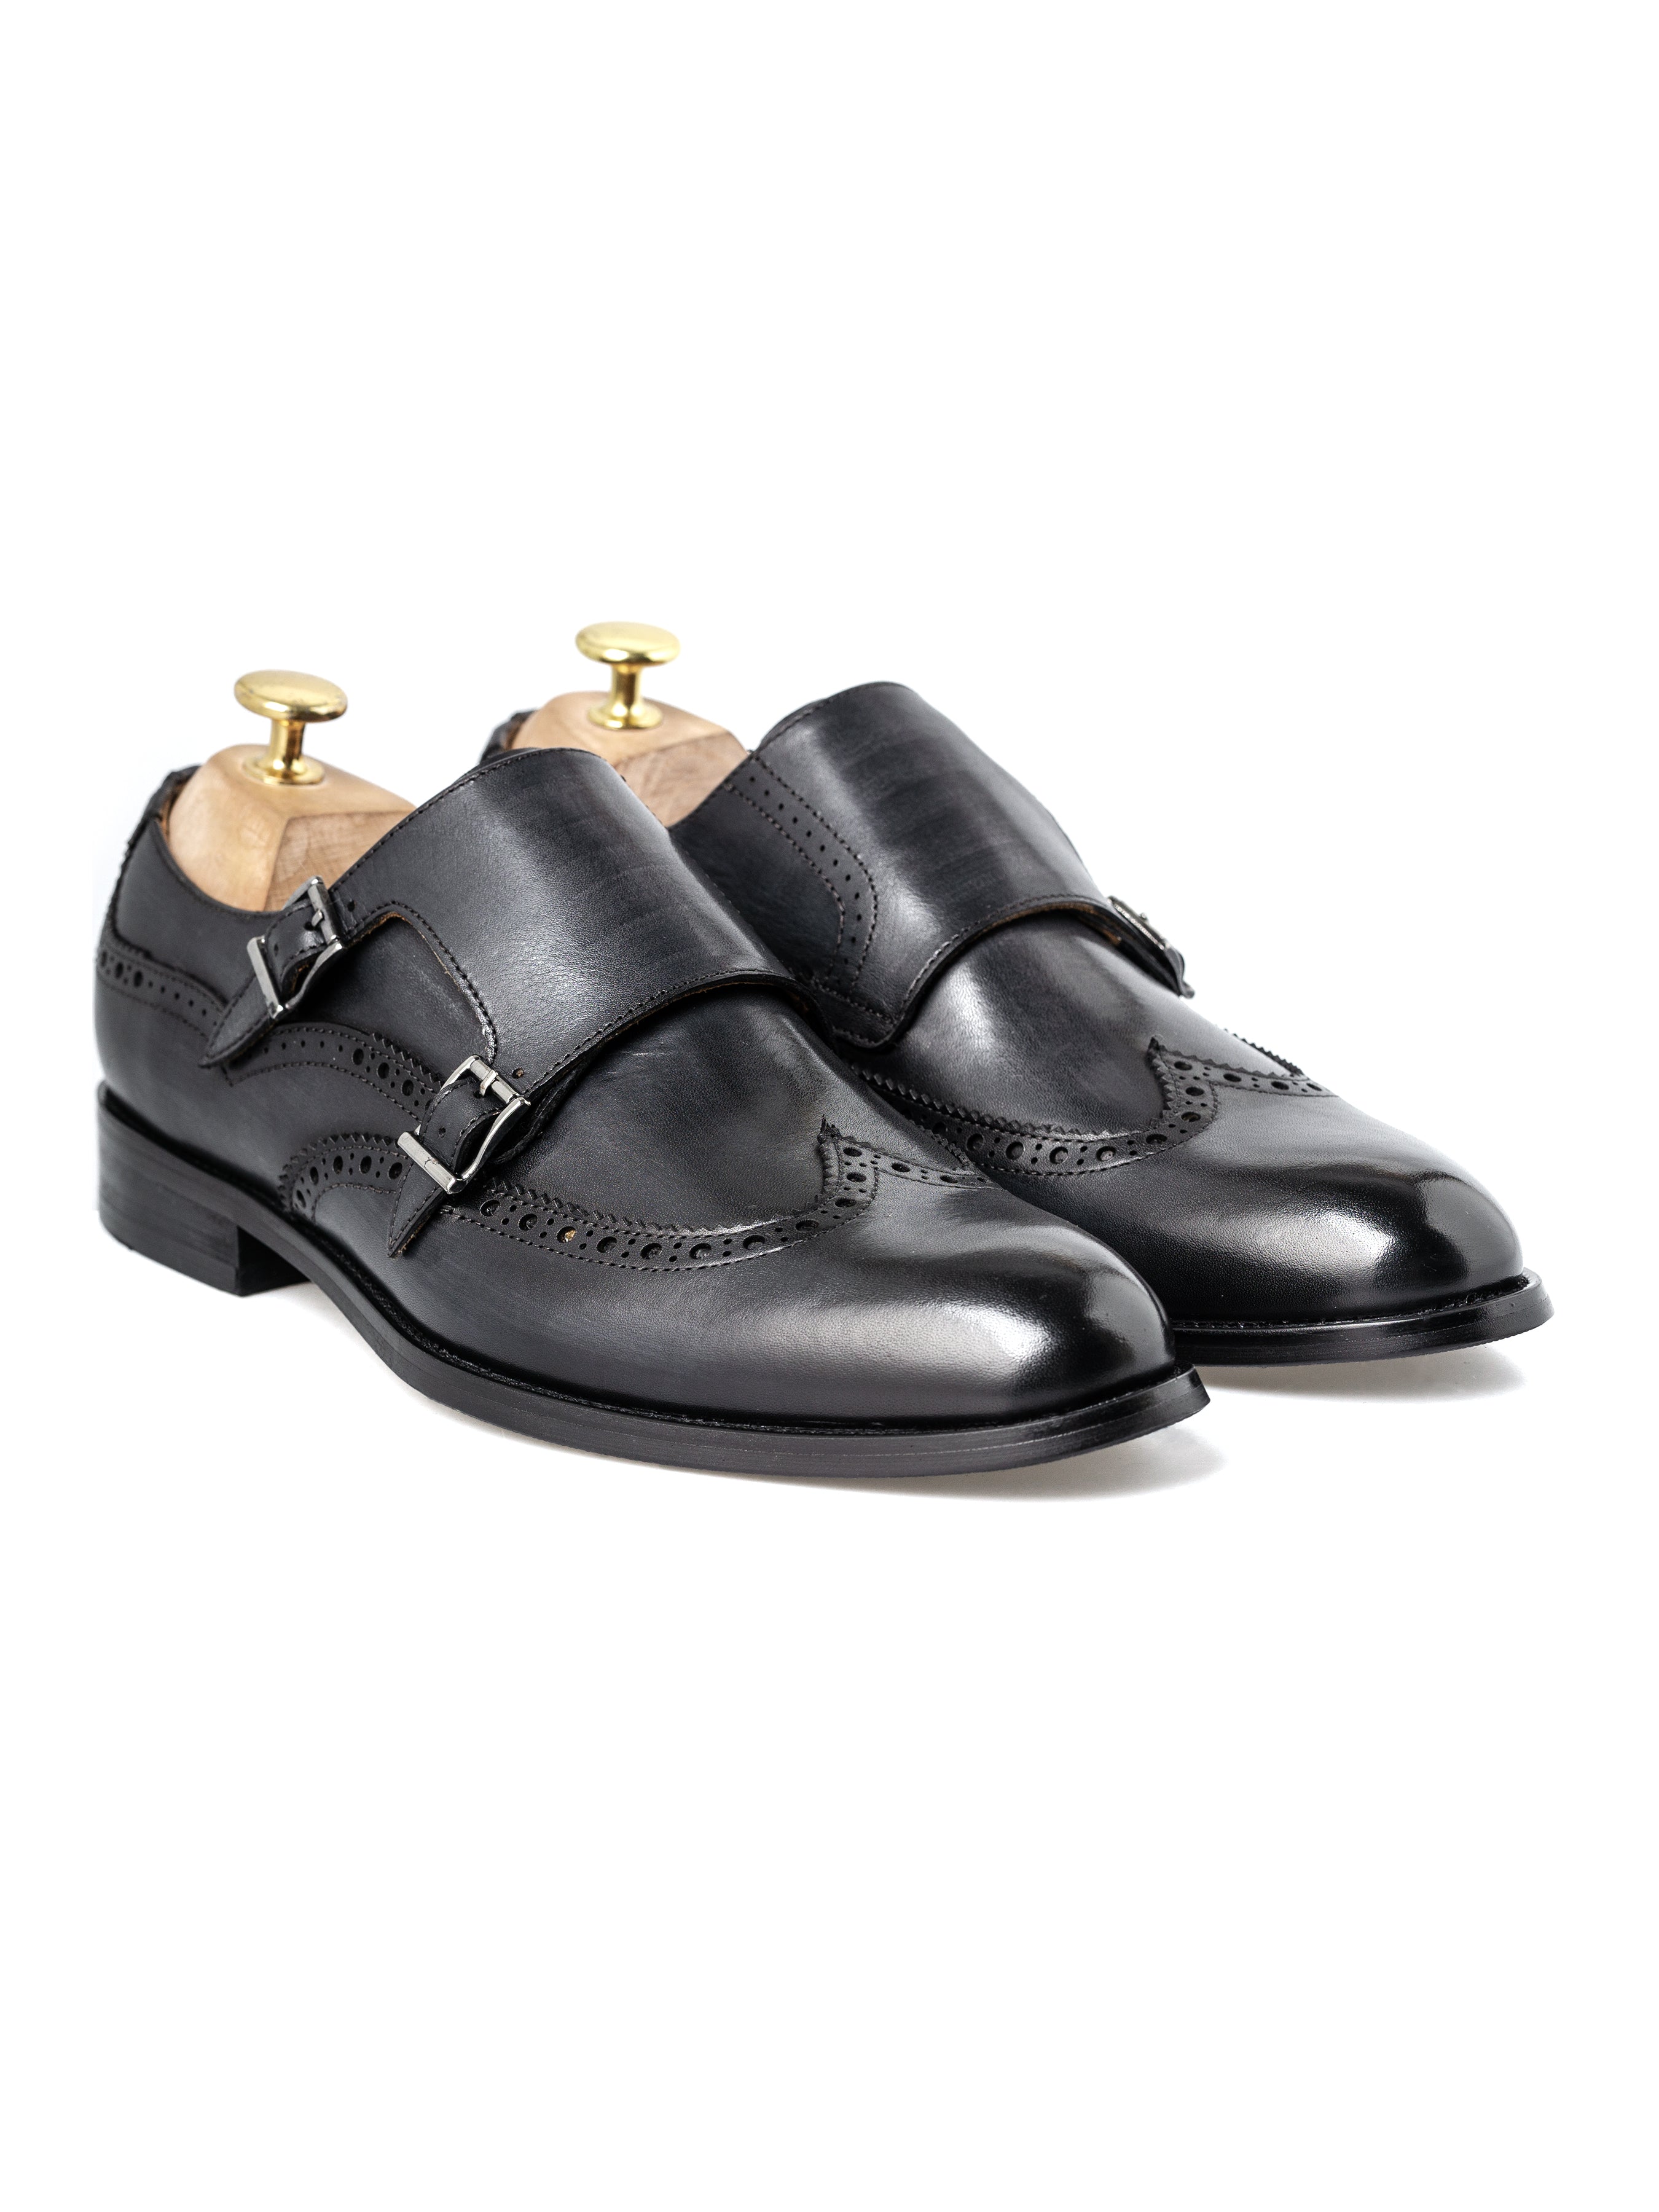 Double Monk Strap Brogue Wingtip - Duo Tone Black (Hand Painted Patina ...